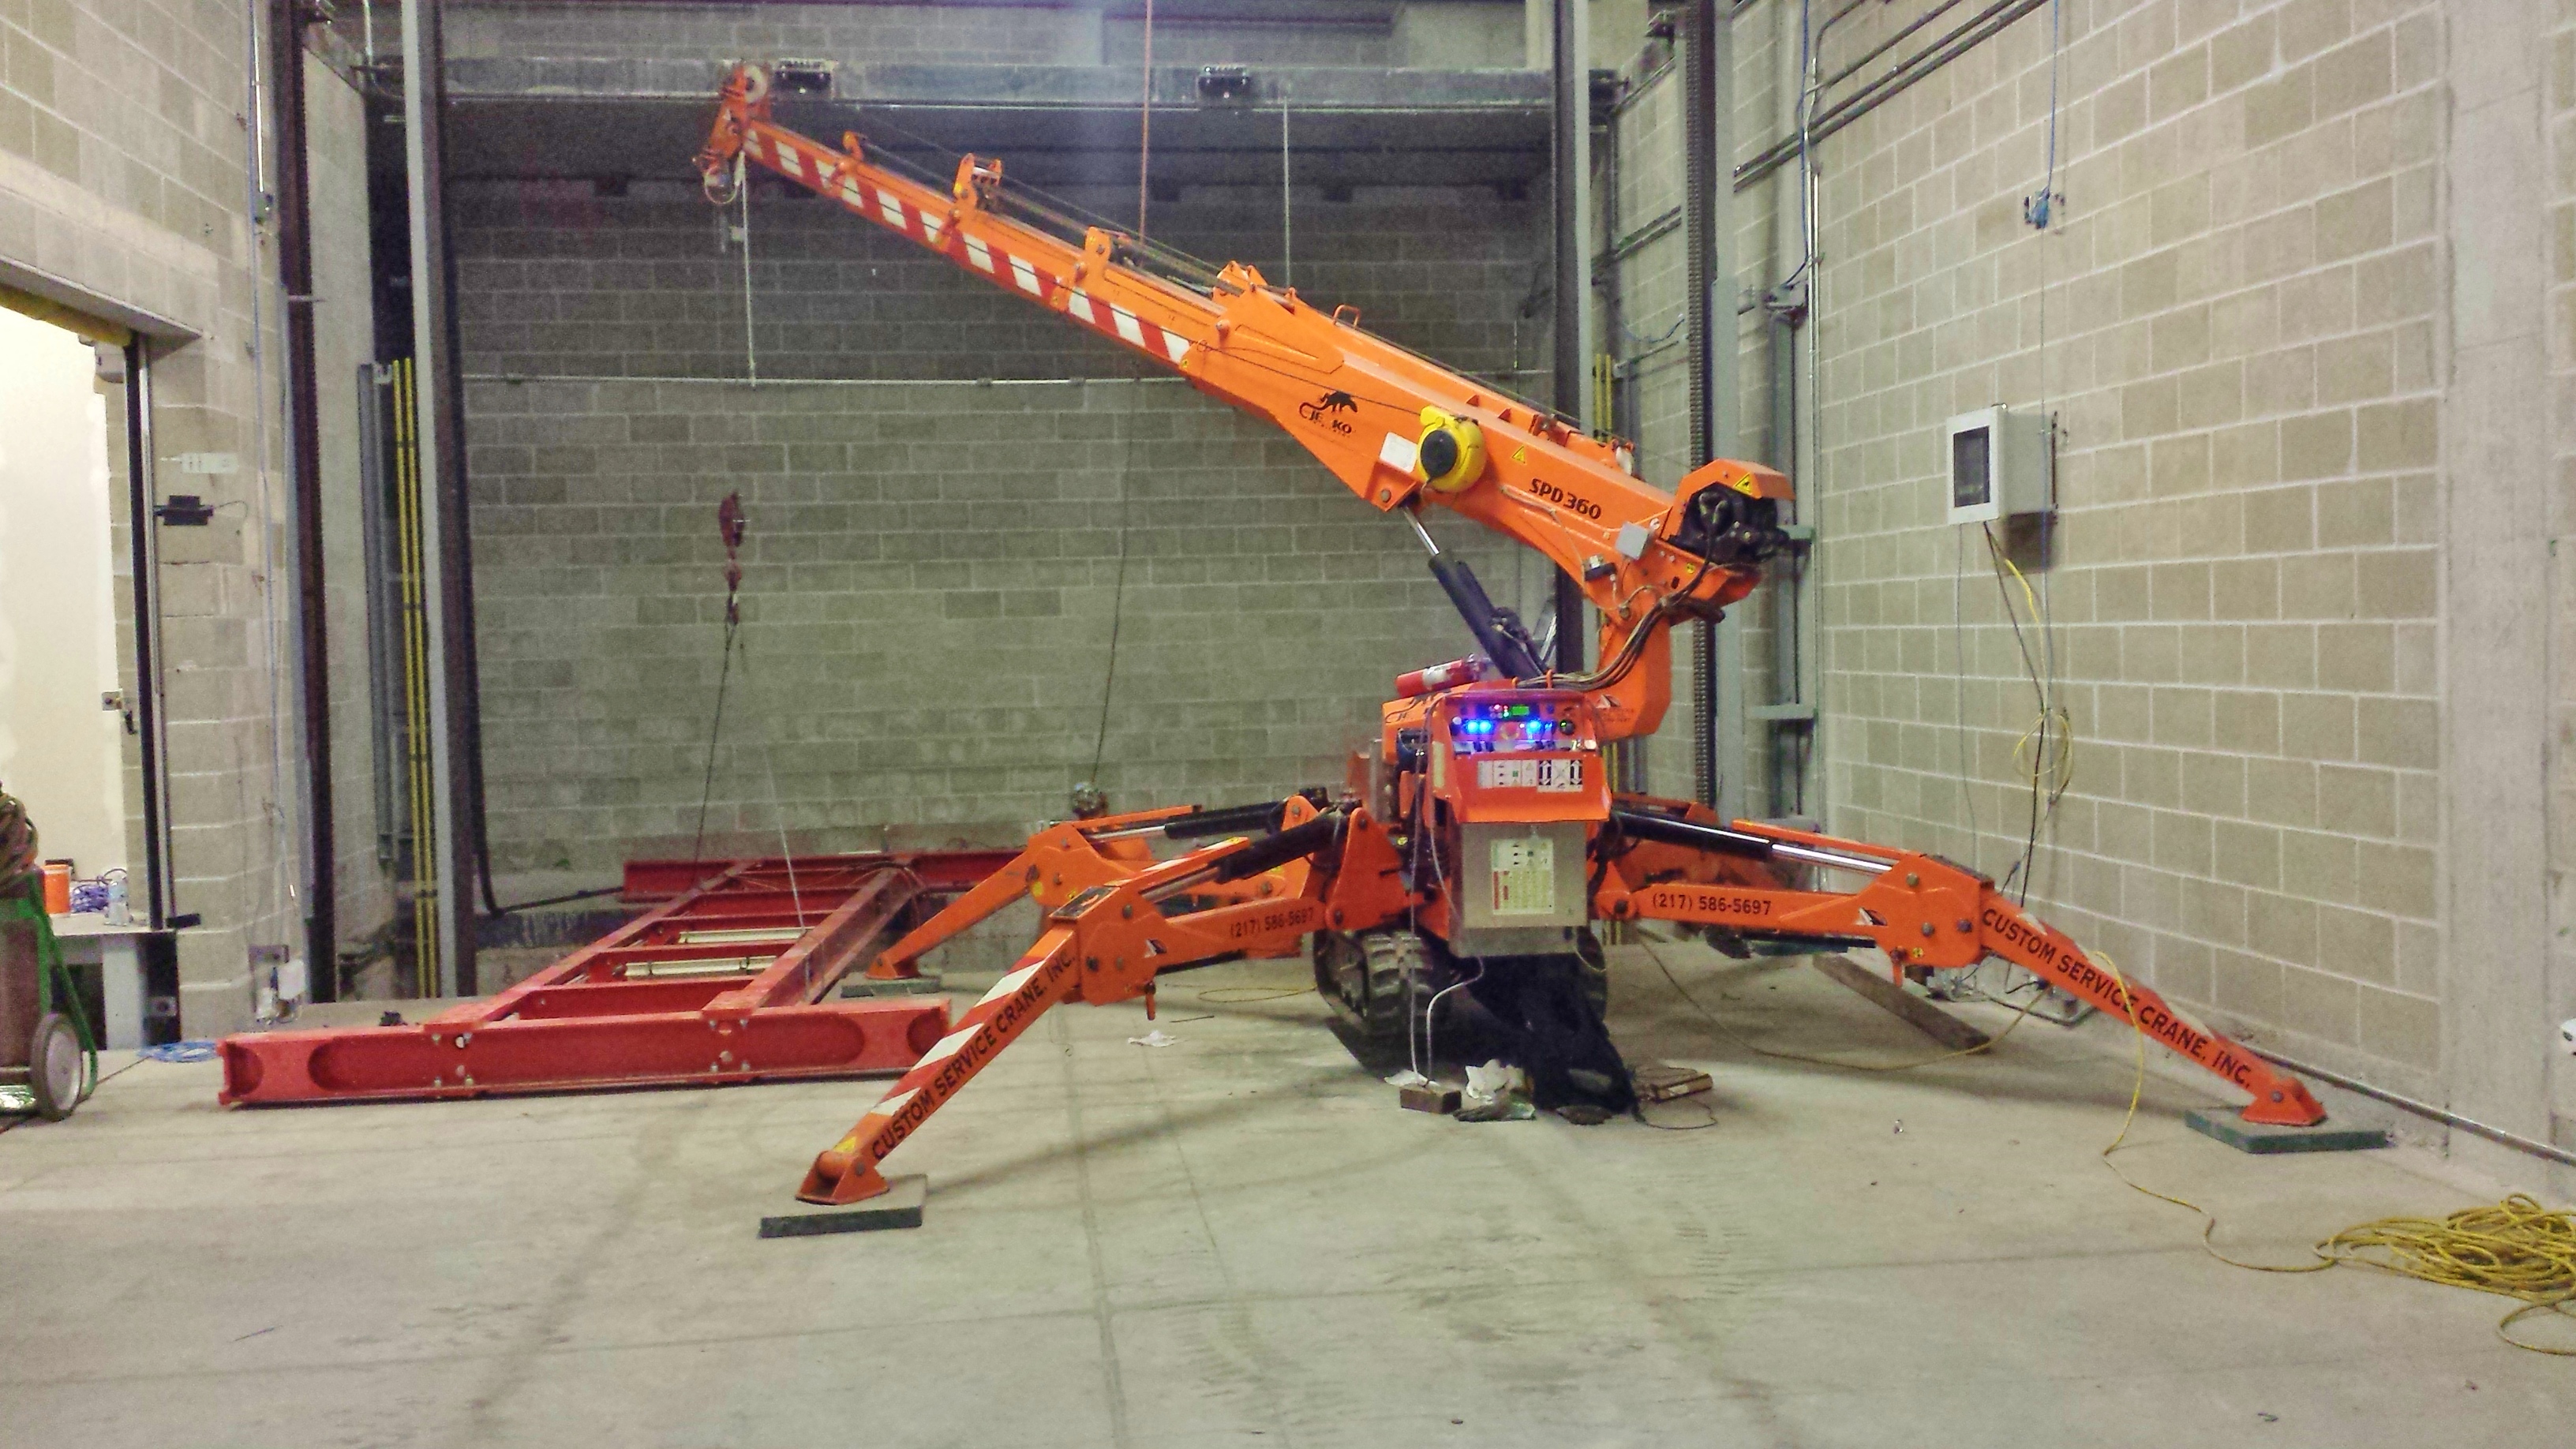 Jekko mini crane is installing an automated parking garage in Champaign, IL.